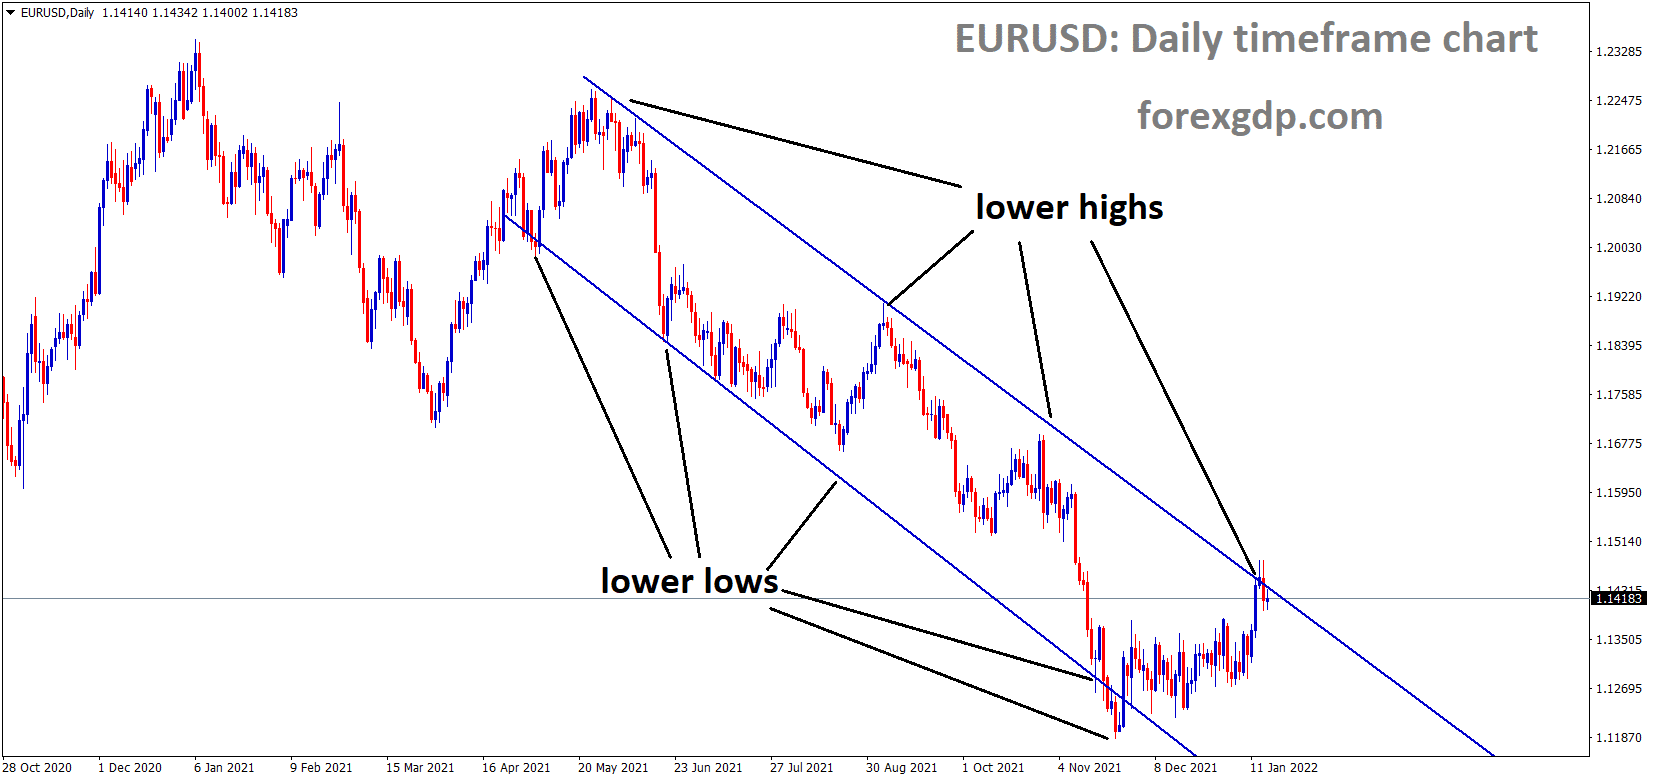 EURUSD is moving in the descending channel and the market has reached the lower high area of the channel